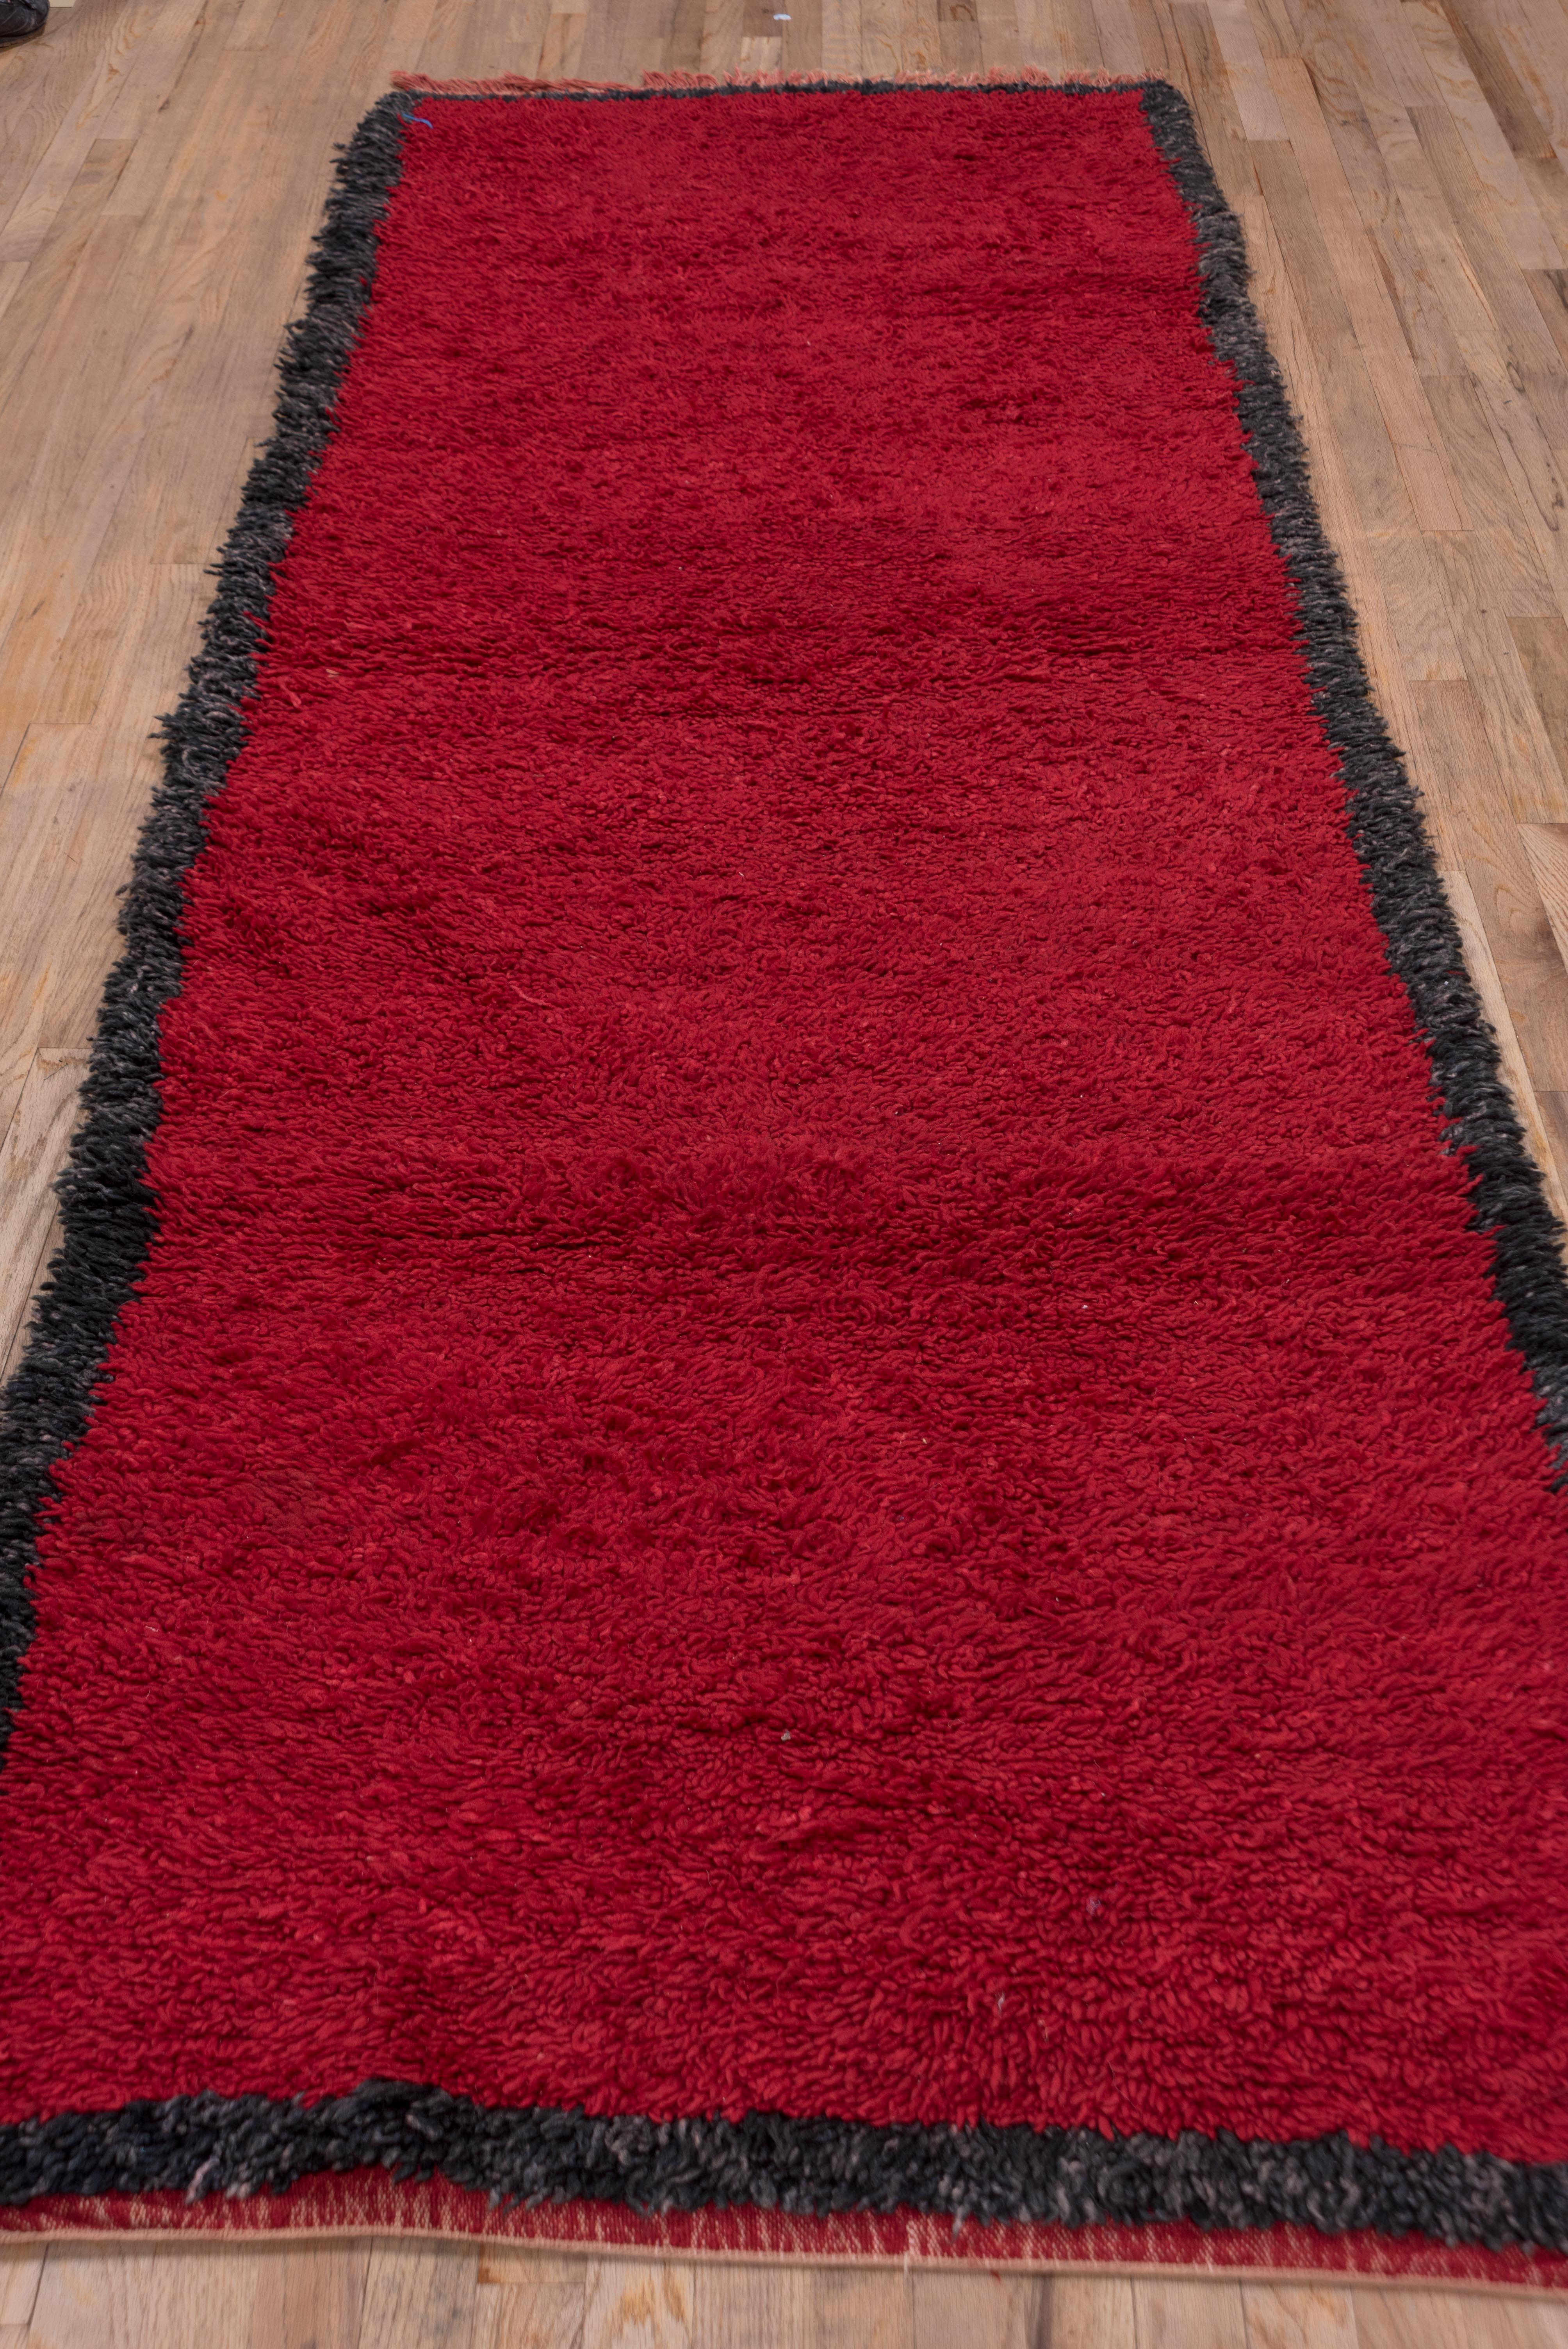 Thick hand-knotted wool made in Morocco in the early to mid twentieth century, this red with black trim piece is a perfect statement to any hallway or water closet. 